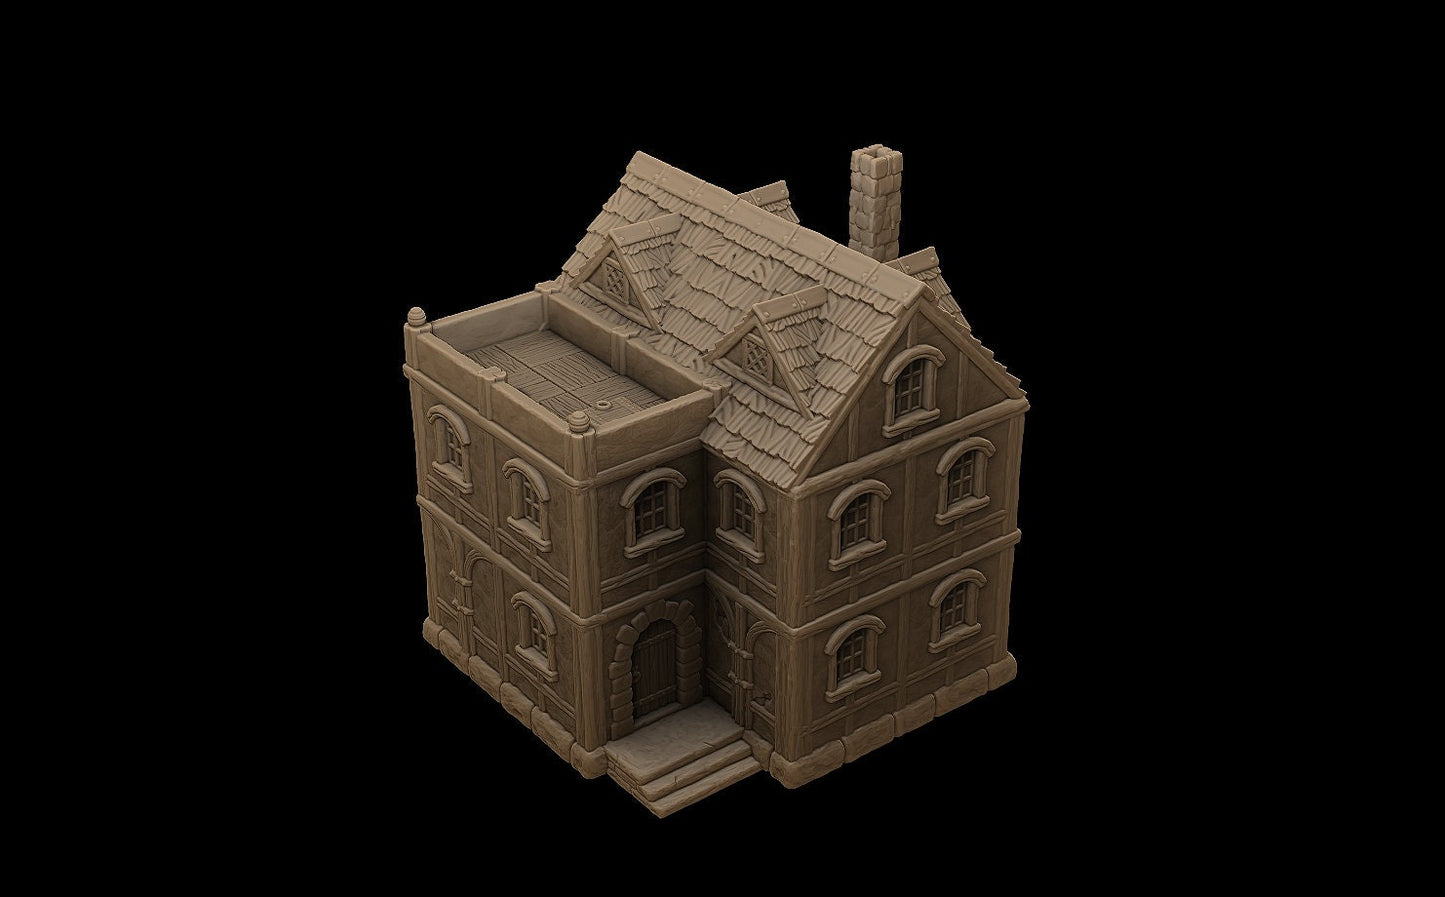 Noble House, Mayor House, Executive Mansion,Guard Tower, Guard, Tower, Watch Tower,Stormhill, city set, town set, House, Terrain, Tabletop, Tabletop Terrain, Tabletop Gaming, Dungeons and Dragons, Wargaming, DnD, D&D, city, tabletop games